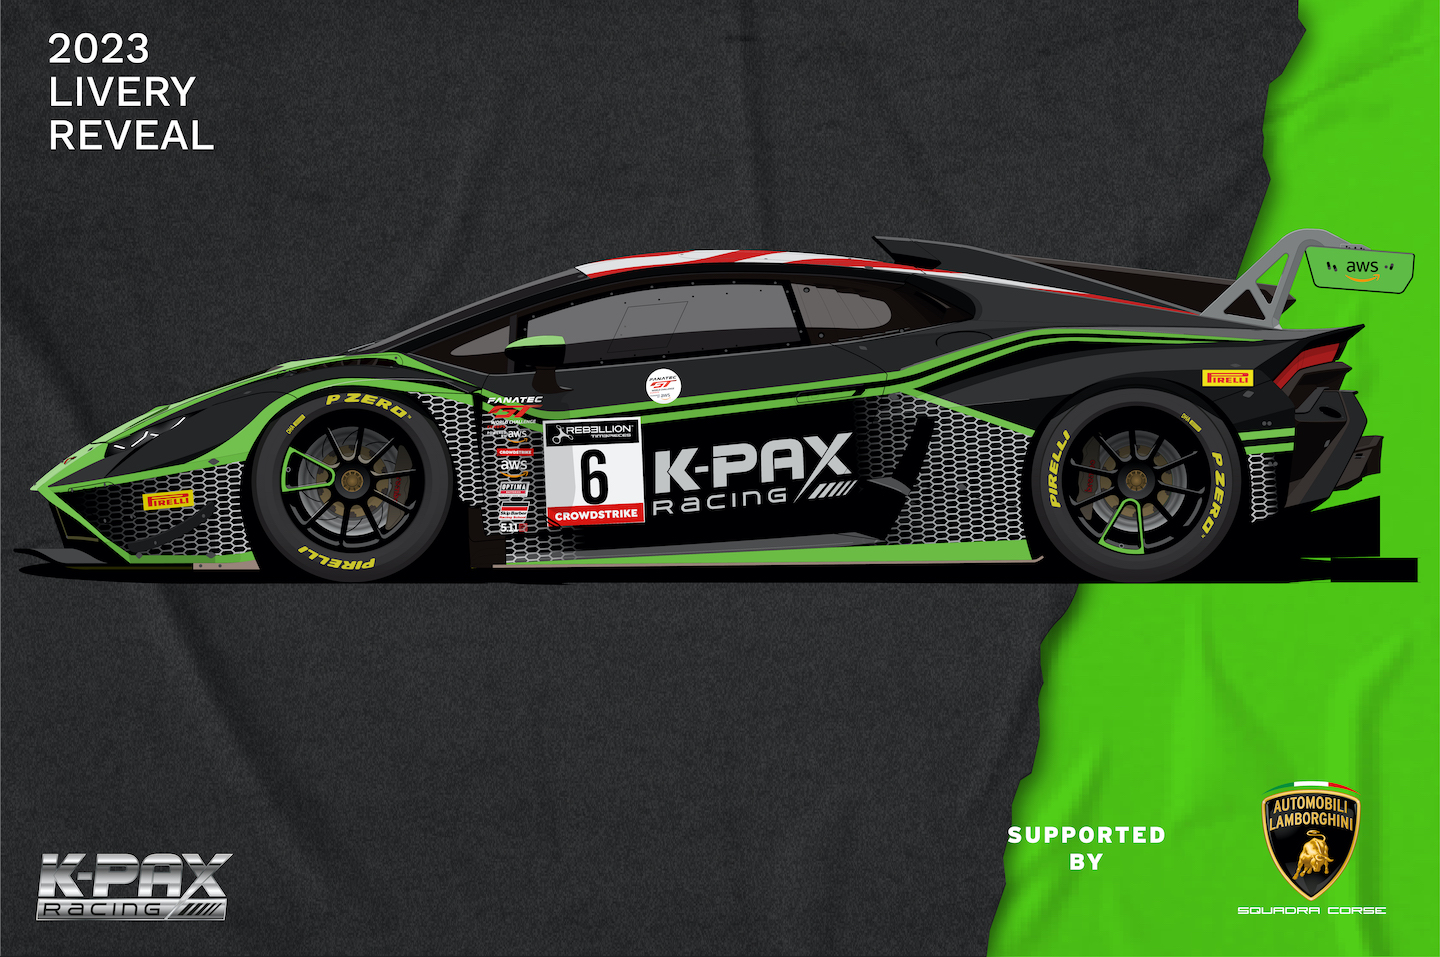 K-PAX Racing returns to Fanatec GT World Challenge Europe Powered by AWS with Lamborghini for 2023